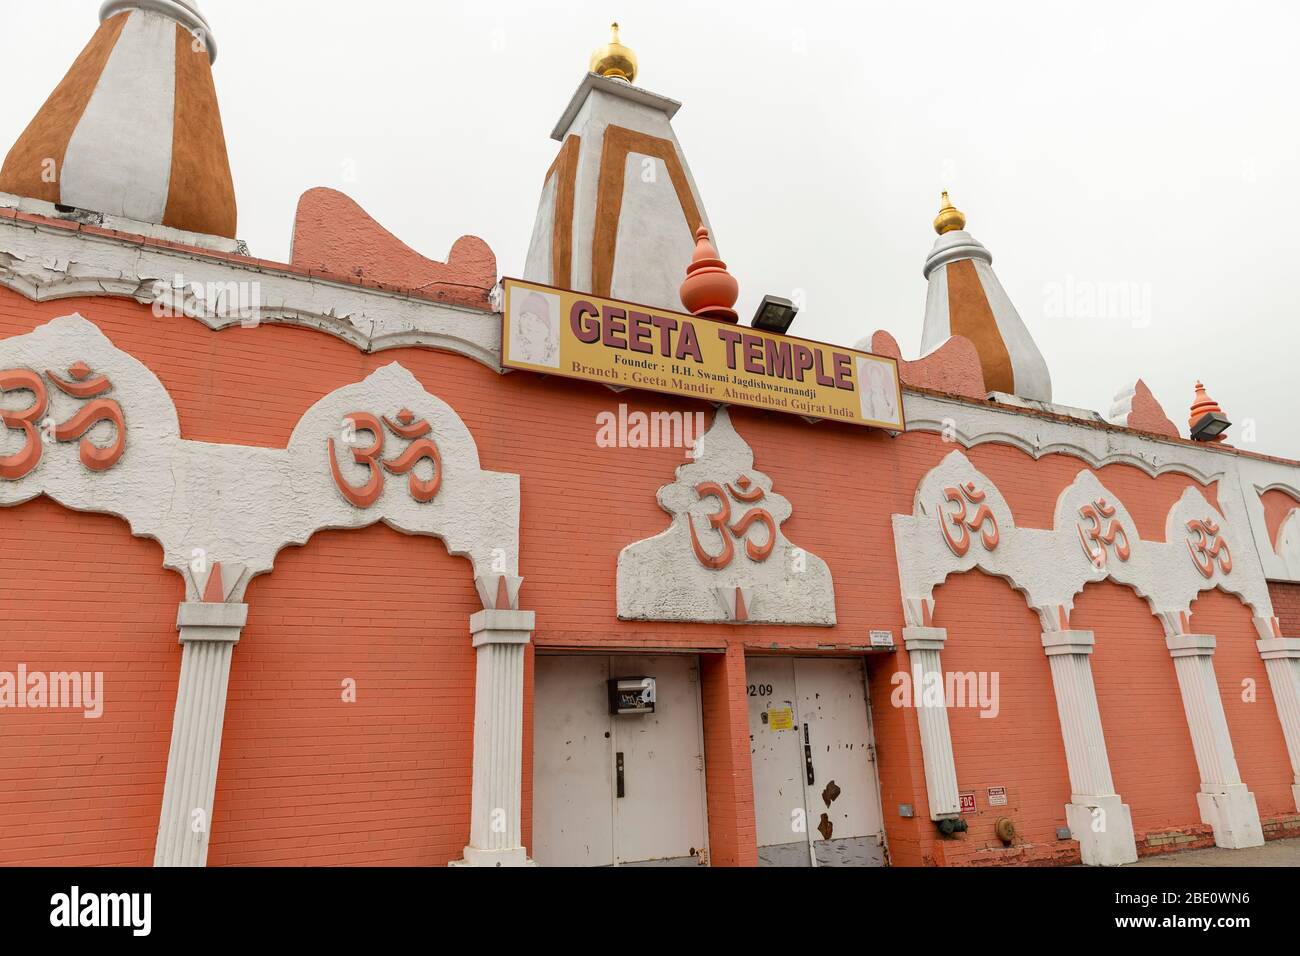 New York, NY - April 10, 2020: View of Geeta Temple closed for prayers because of COVID-19 pandemic in Corona neighborhood of Queens Stock Photo